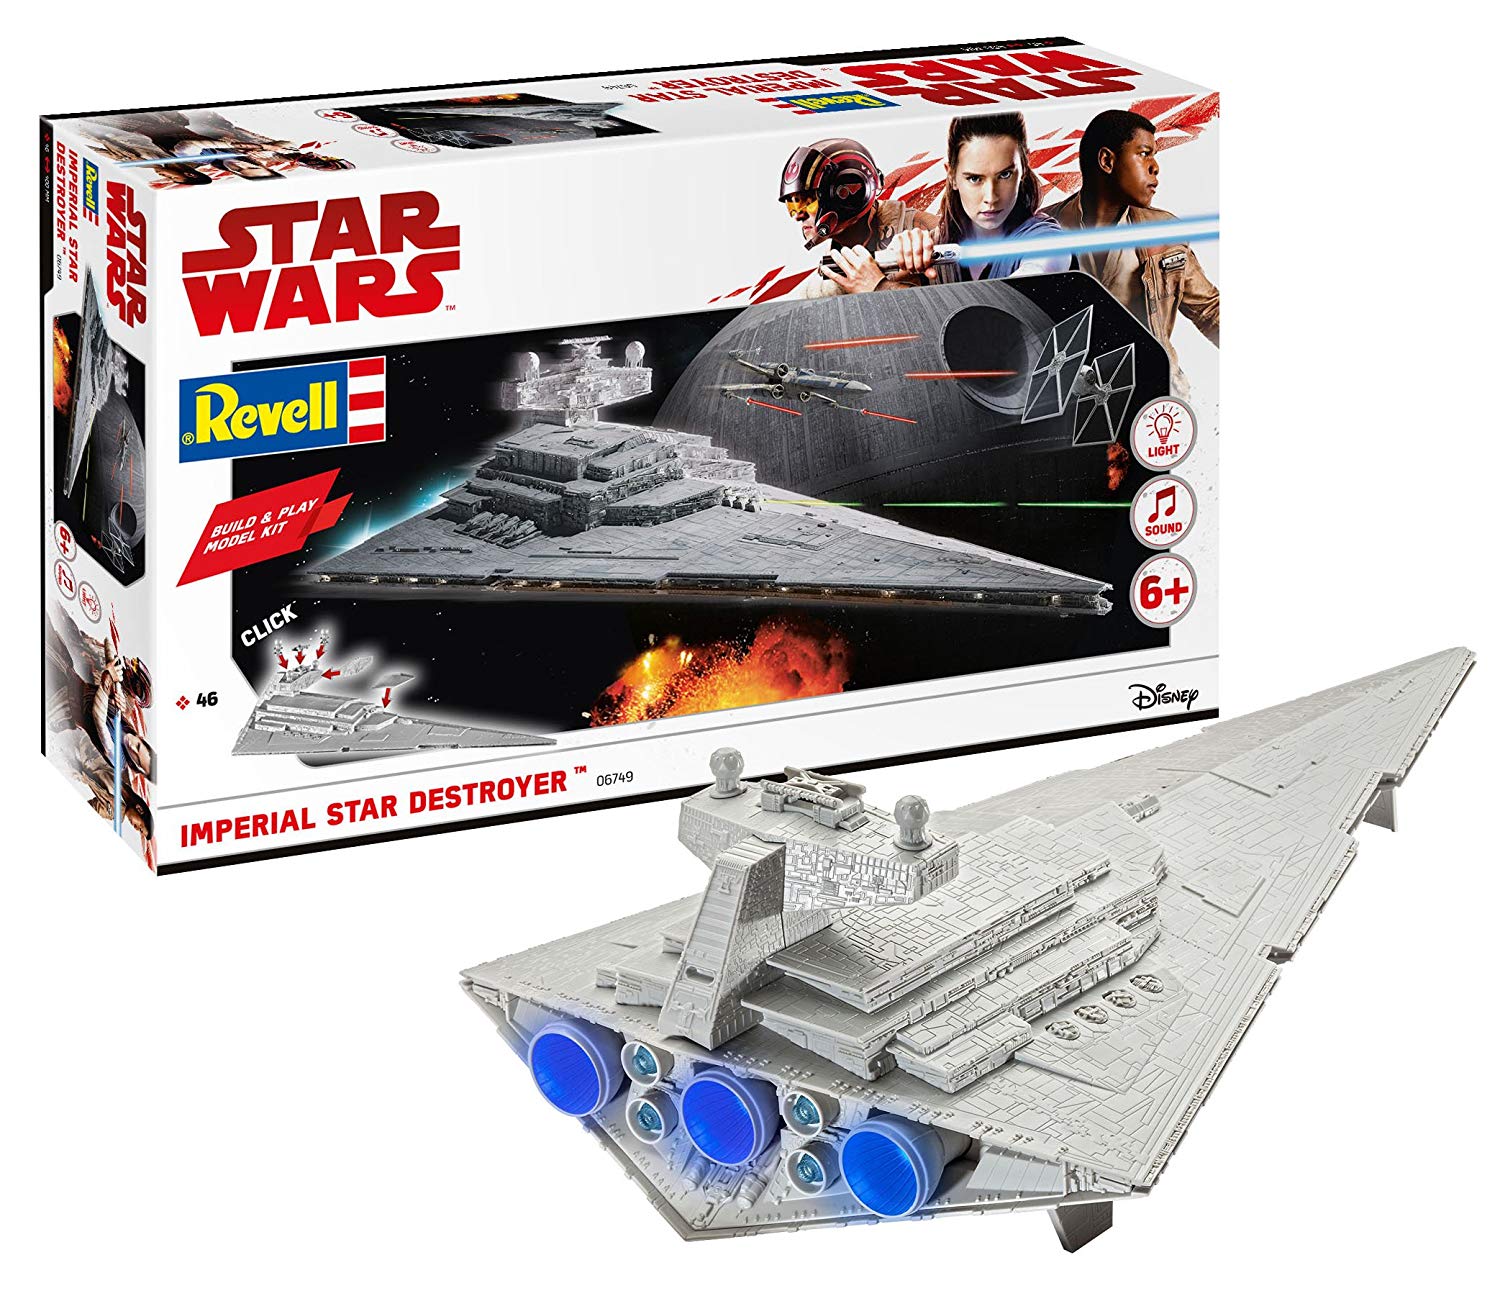 Revell Gmbh Lights Sounds Wars Imperial Star Destroyer